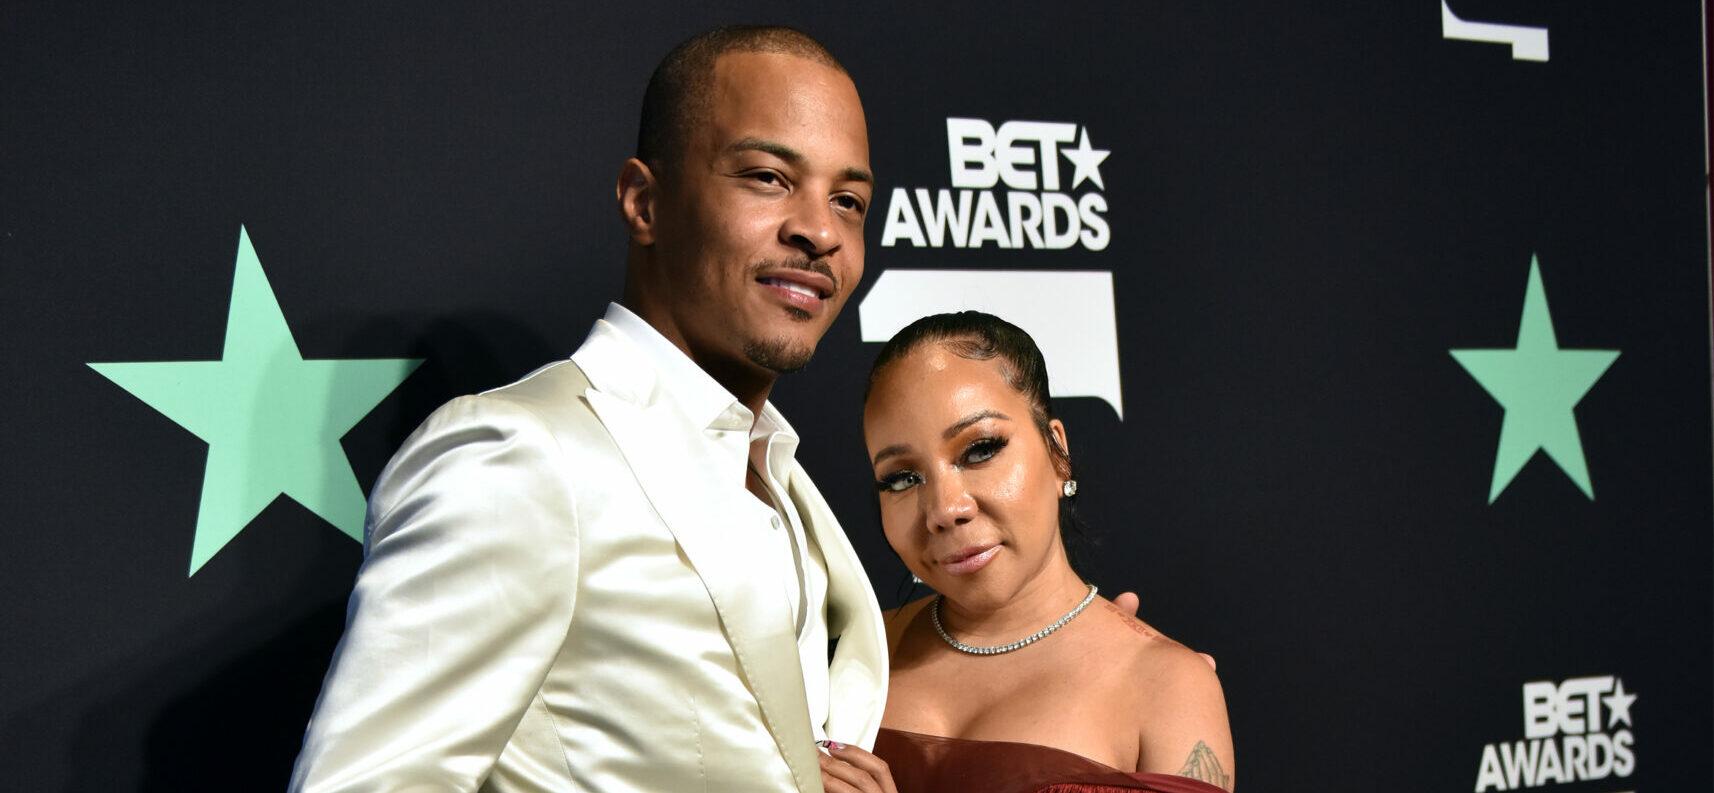 Tameka “Tiny” Harris Hails T.I As ‘Man Of My Dreams’ In Touching 12th Wedding Anniversary Tribute